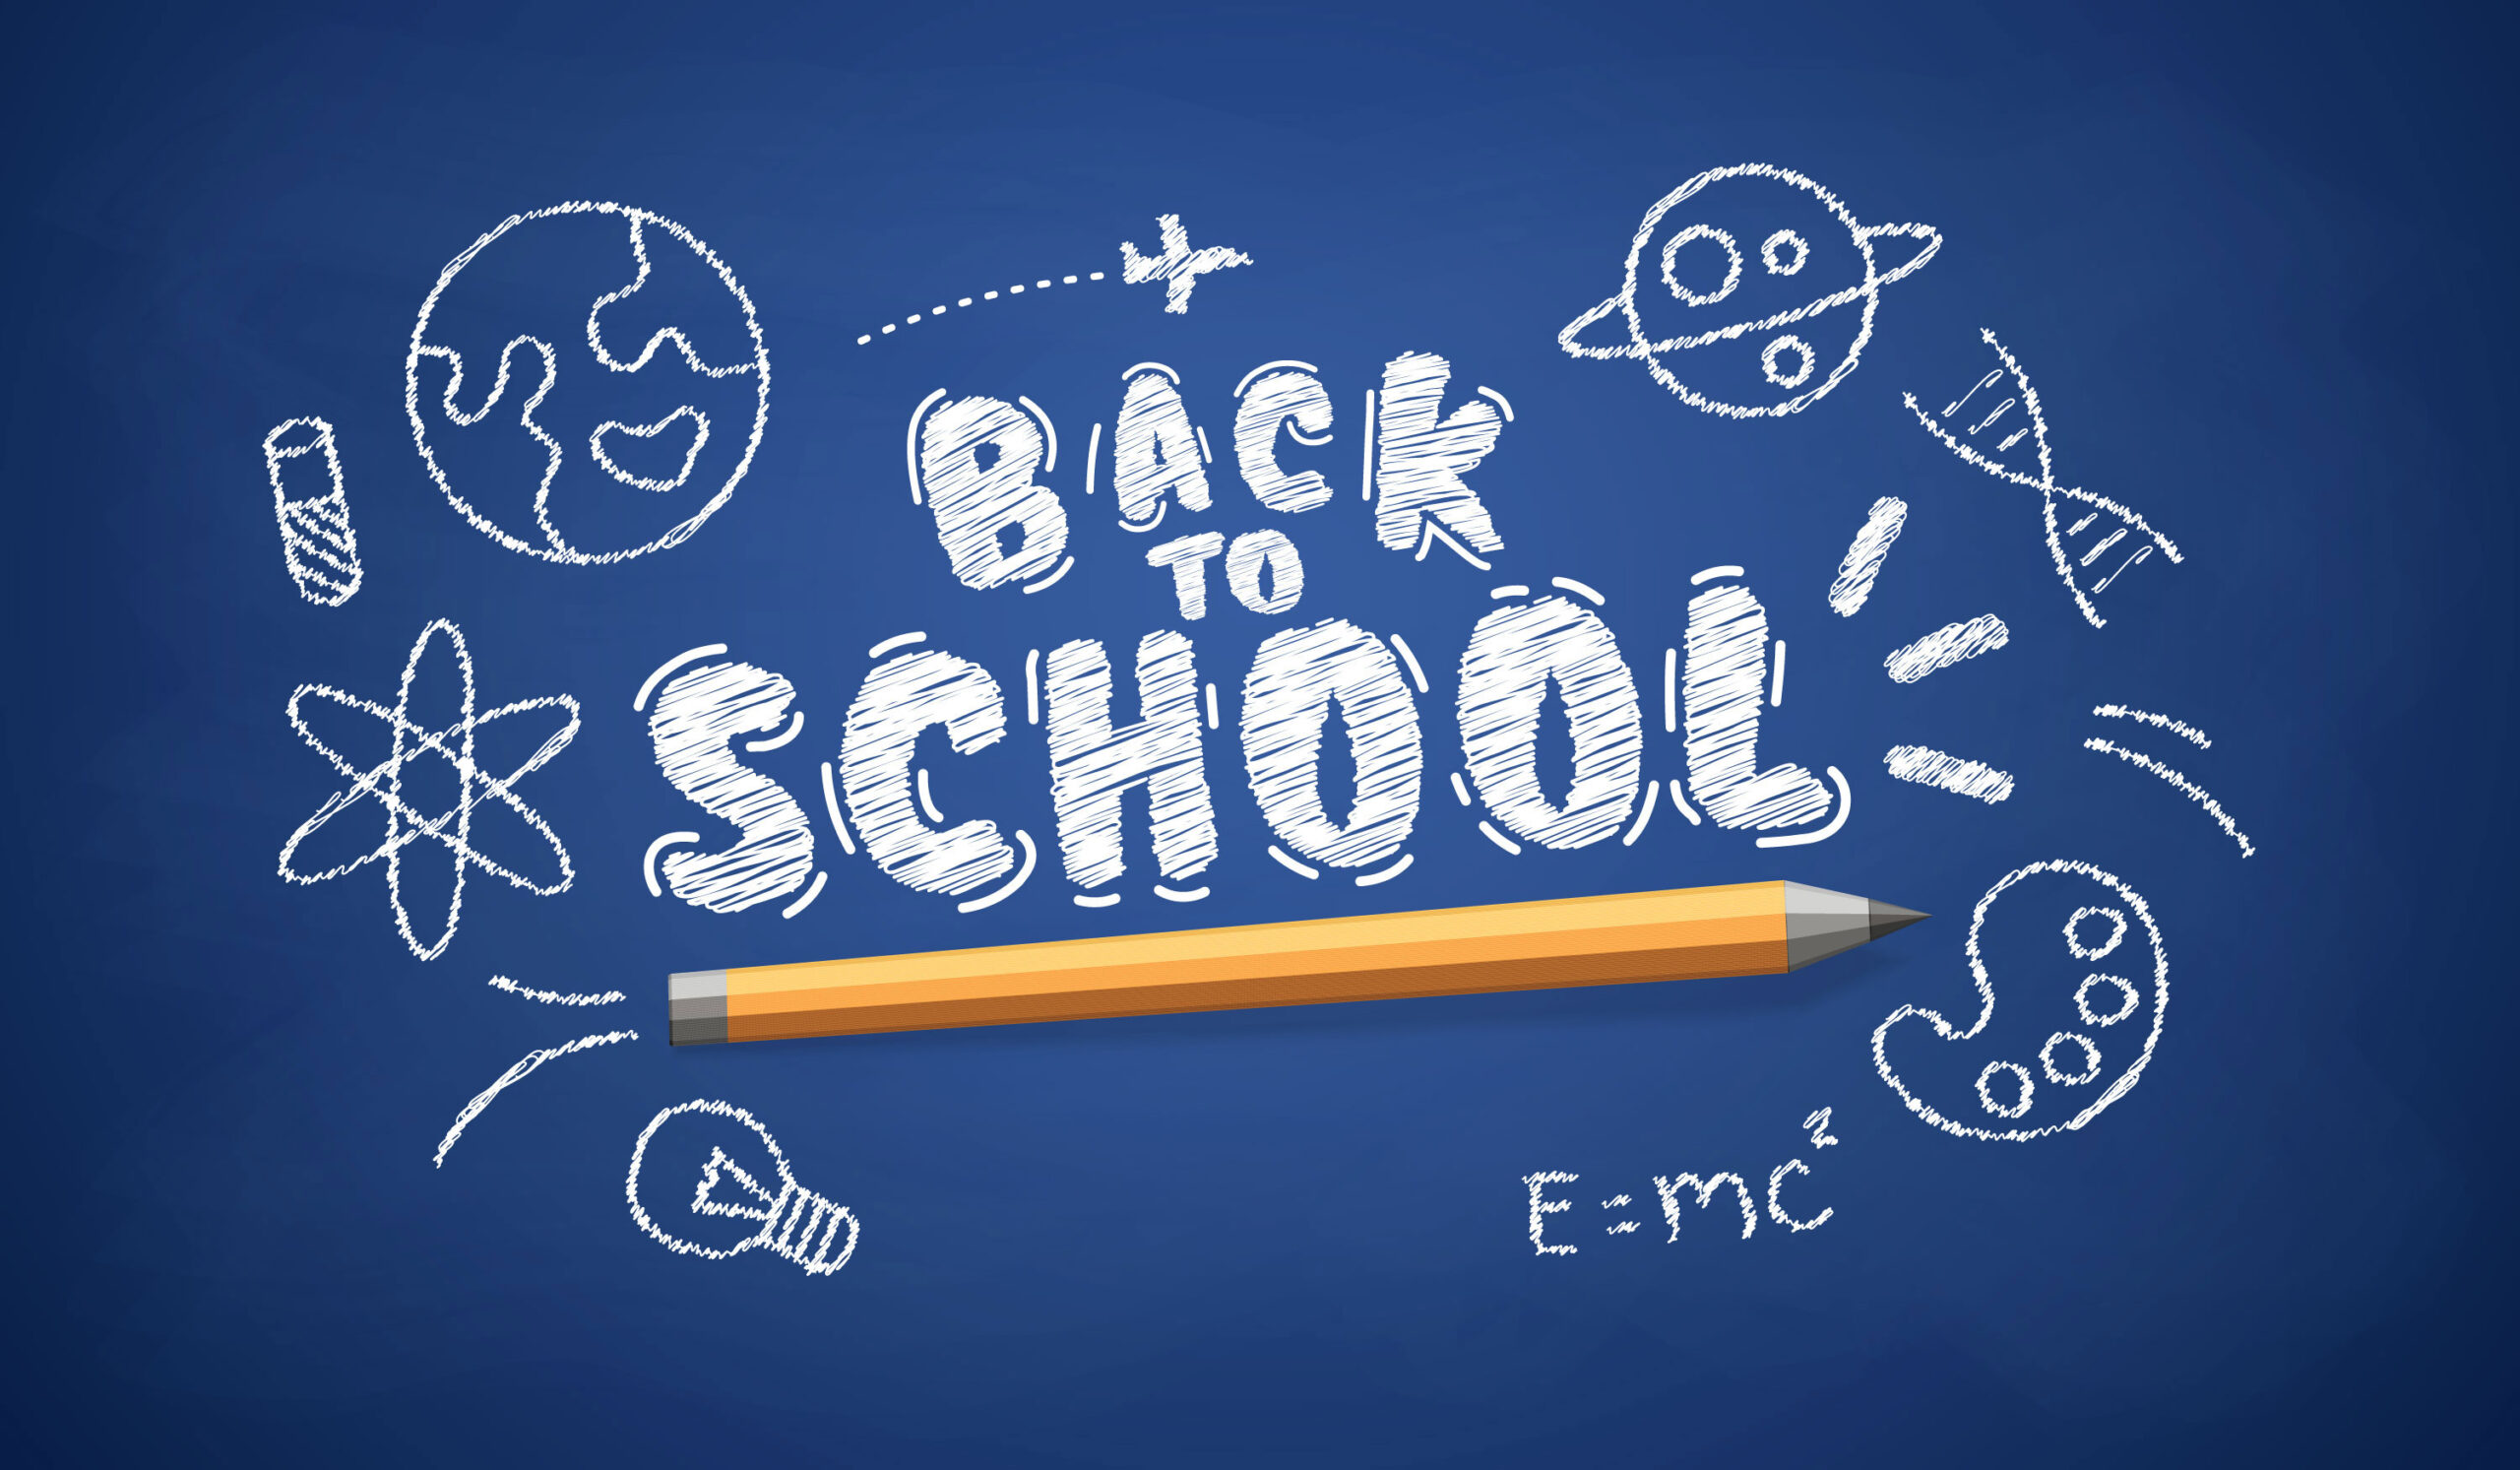 Welcome Back to School Text on Blue Board, Realistic Pencil With Doodles Background